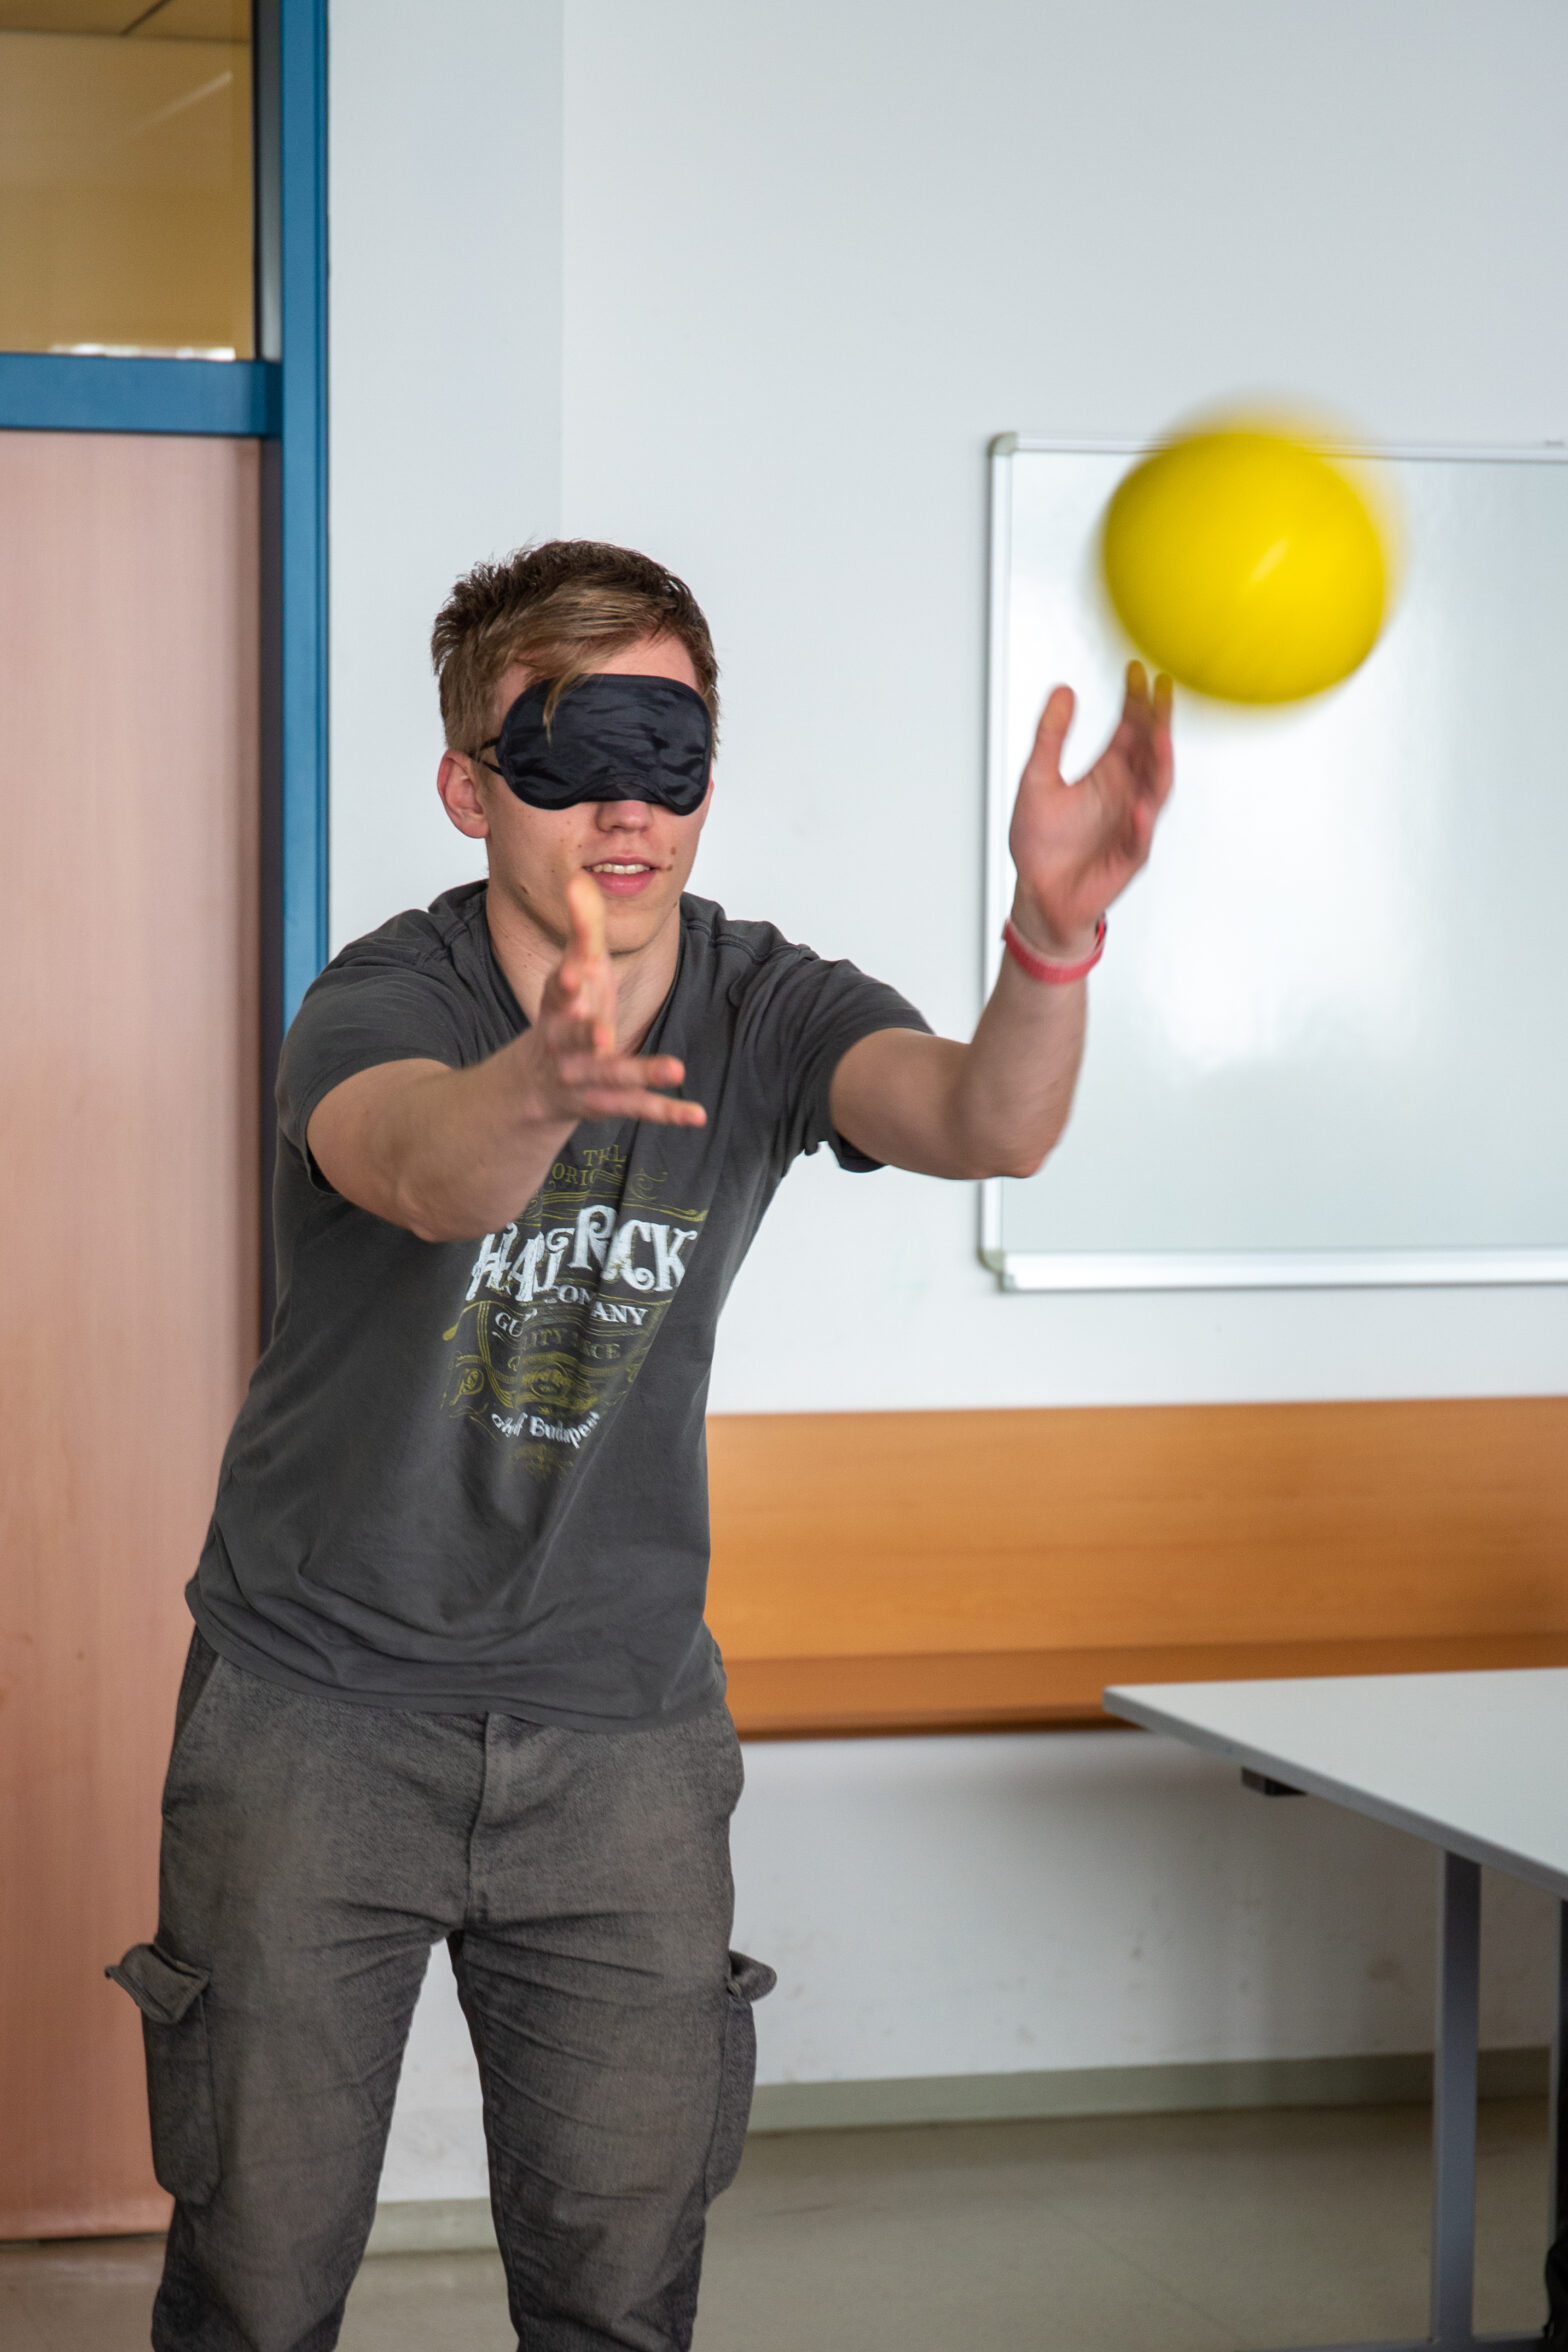 A not impaired student with sleep goggles on trying to catch a thrown bell ball